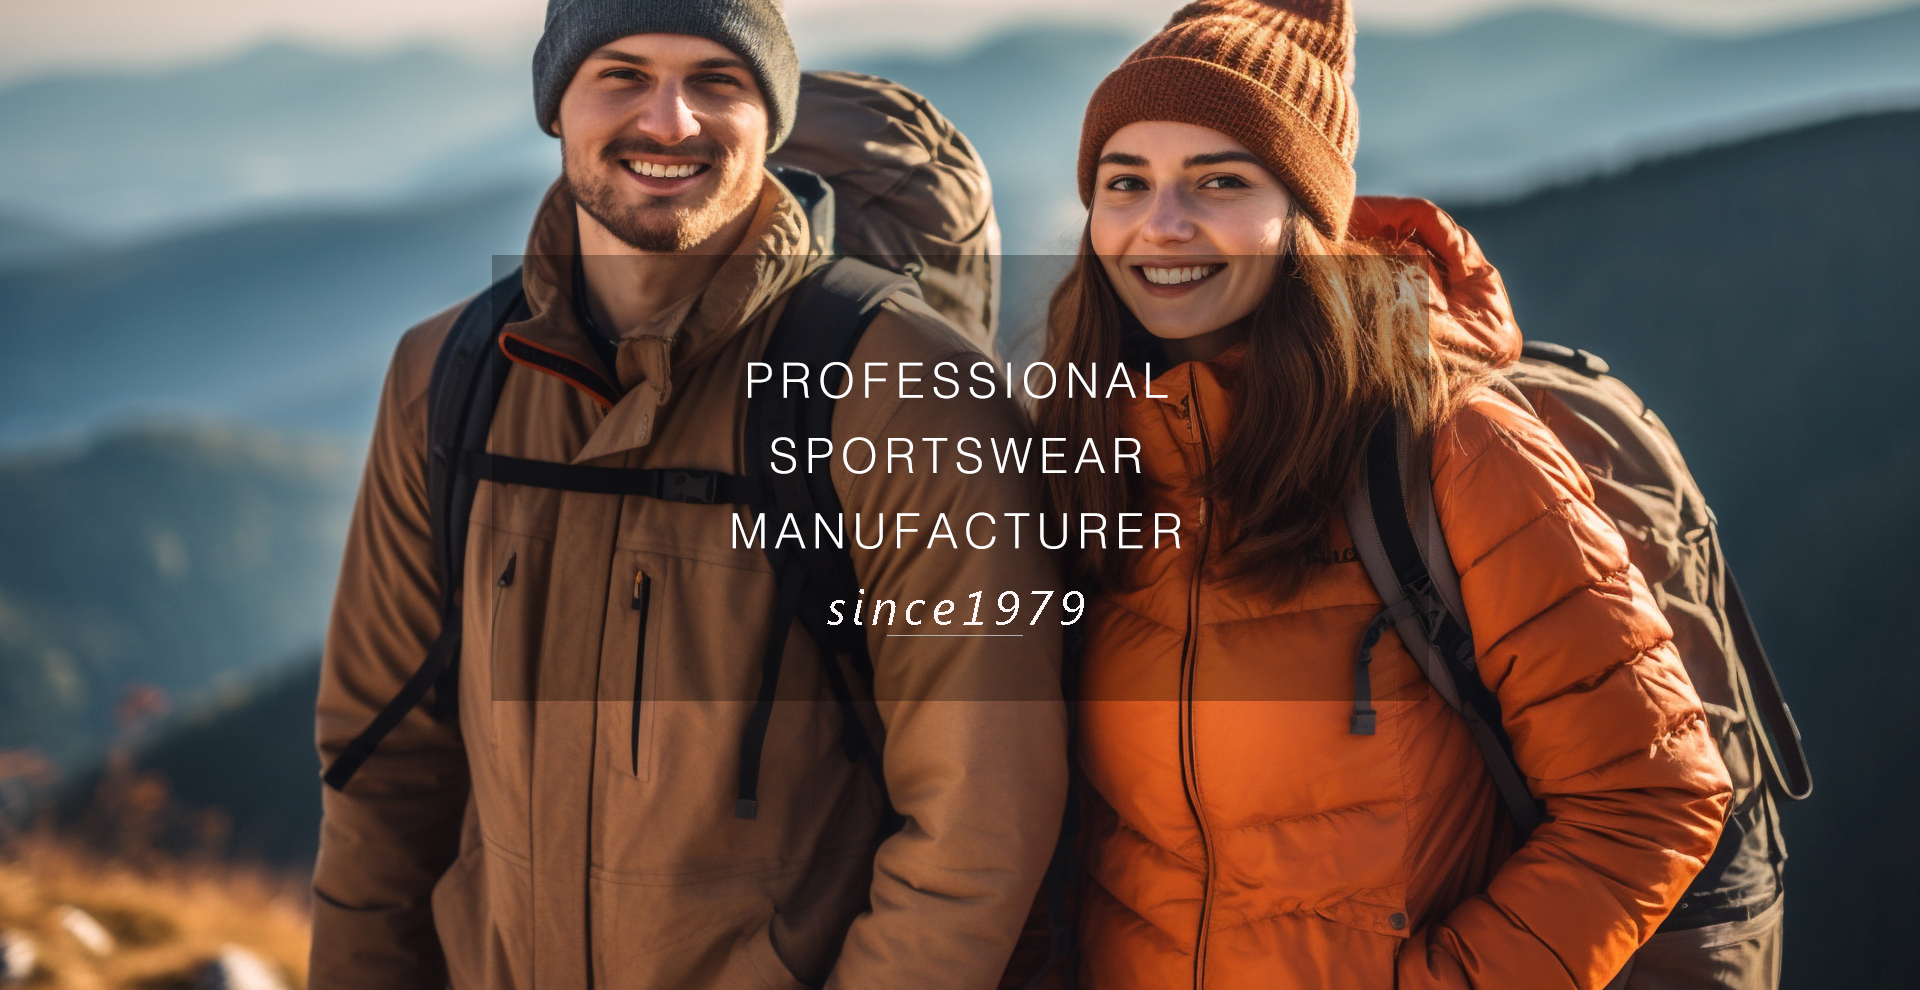 Outdoor Jackets Supplier - Clothing Factory - Garment manufacturer clothing  supplier-Signal Sportswear | Funktionswesten